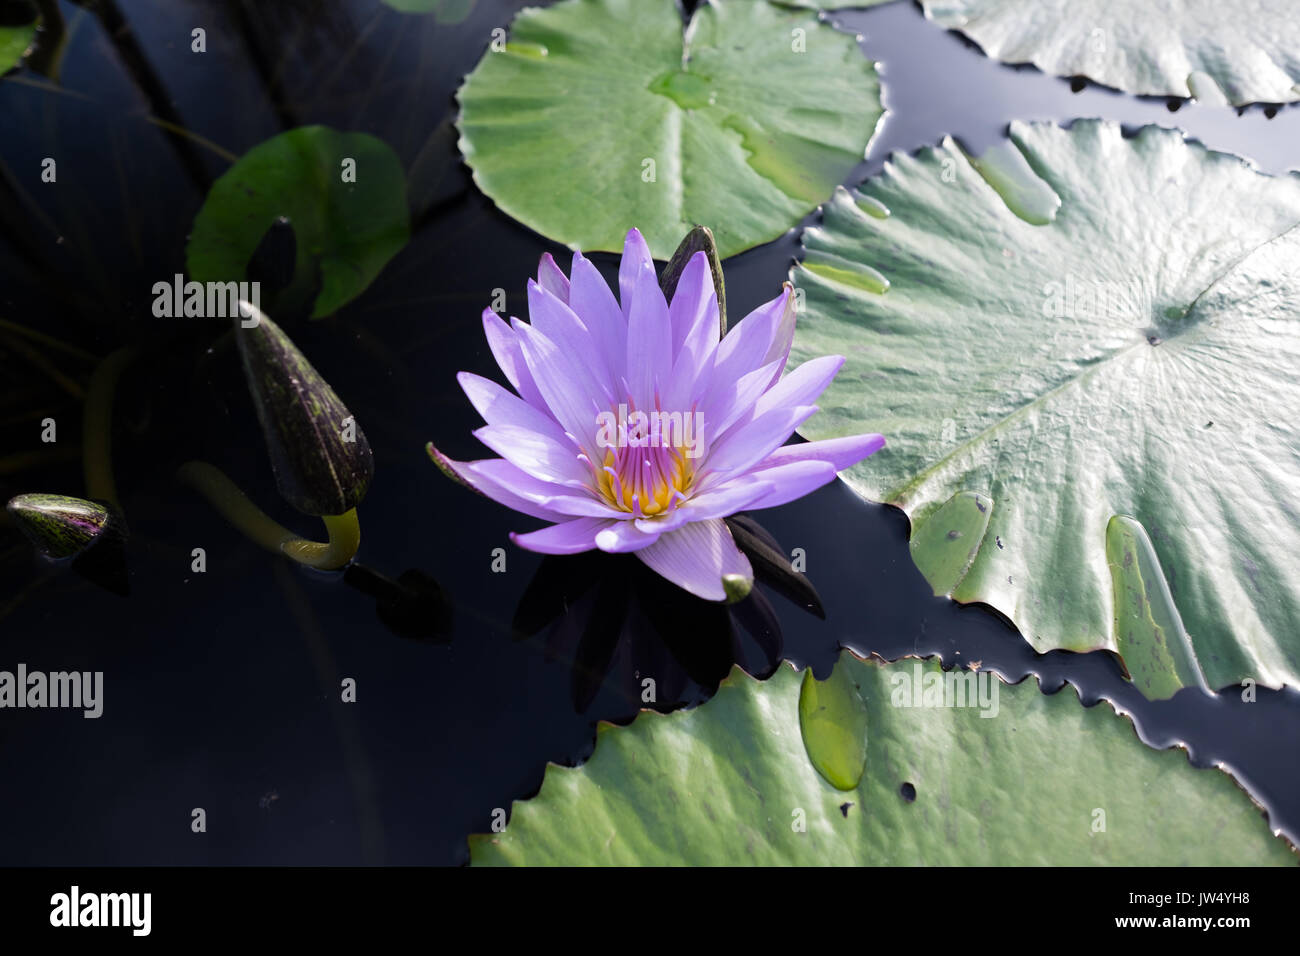 purple lotus flower on water with water lilies Stock Photo